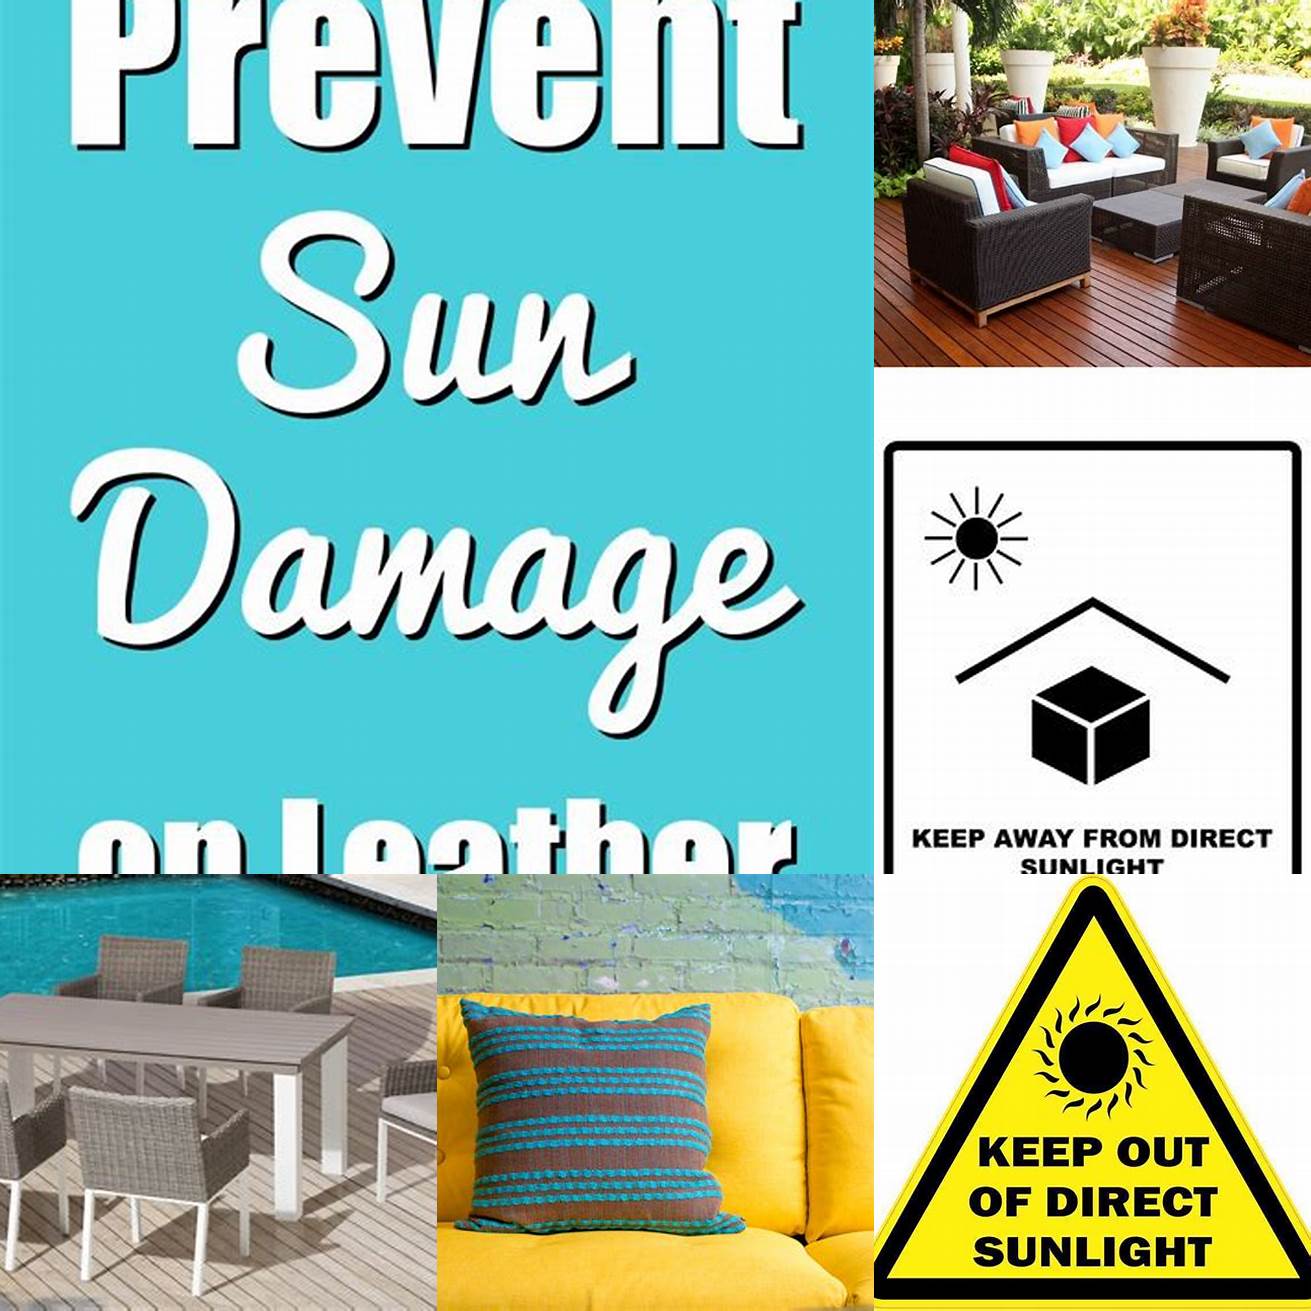 Keep furniture away from direct sunlight